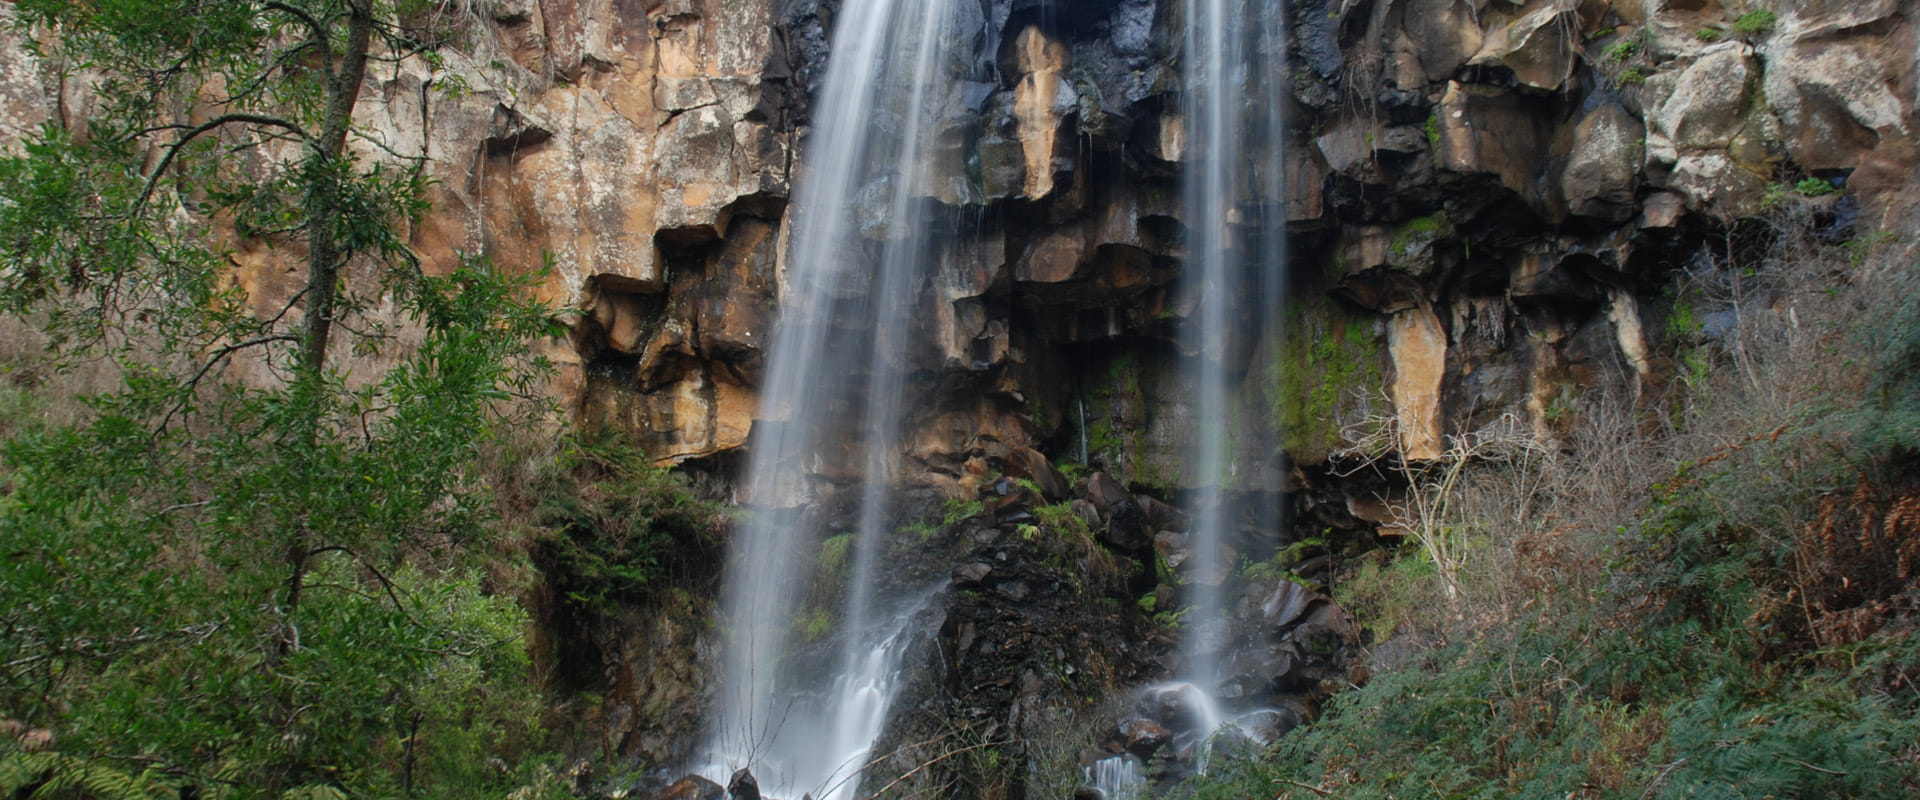 A full flowing waterfall cascades down into a rocky cliff face surrounded by rugged bushland.